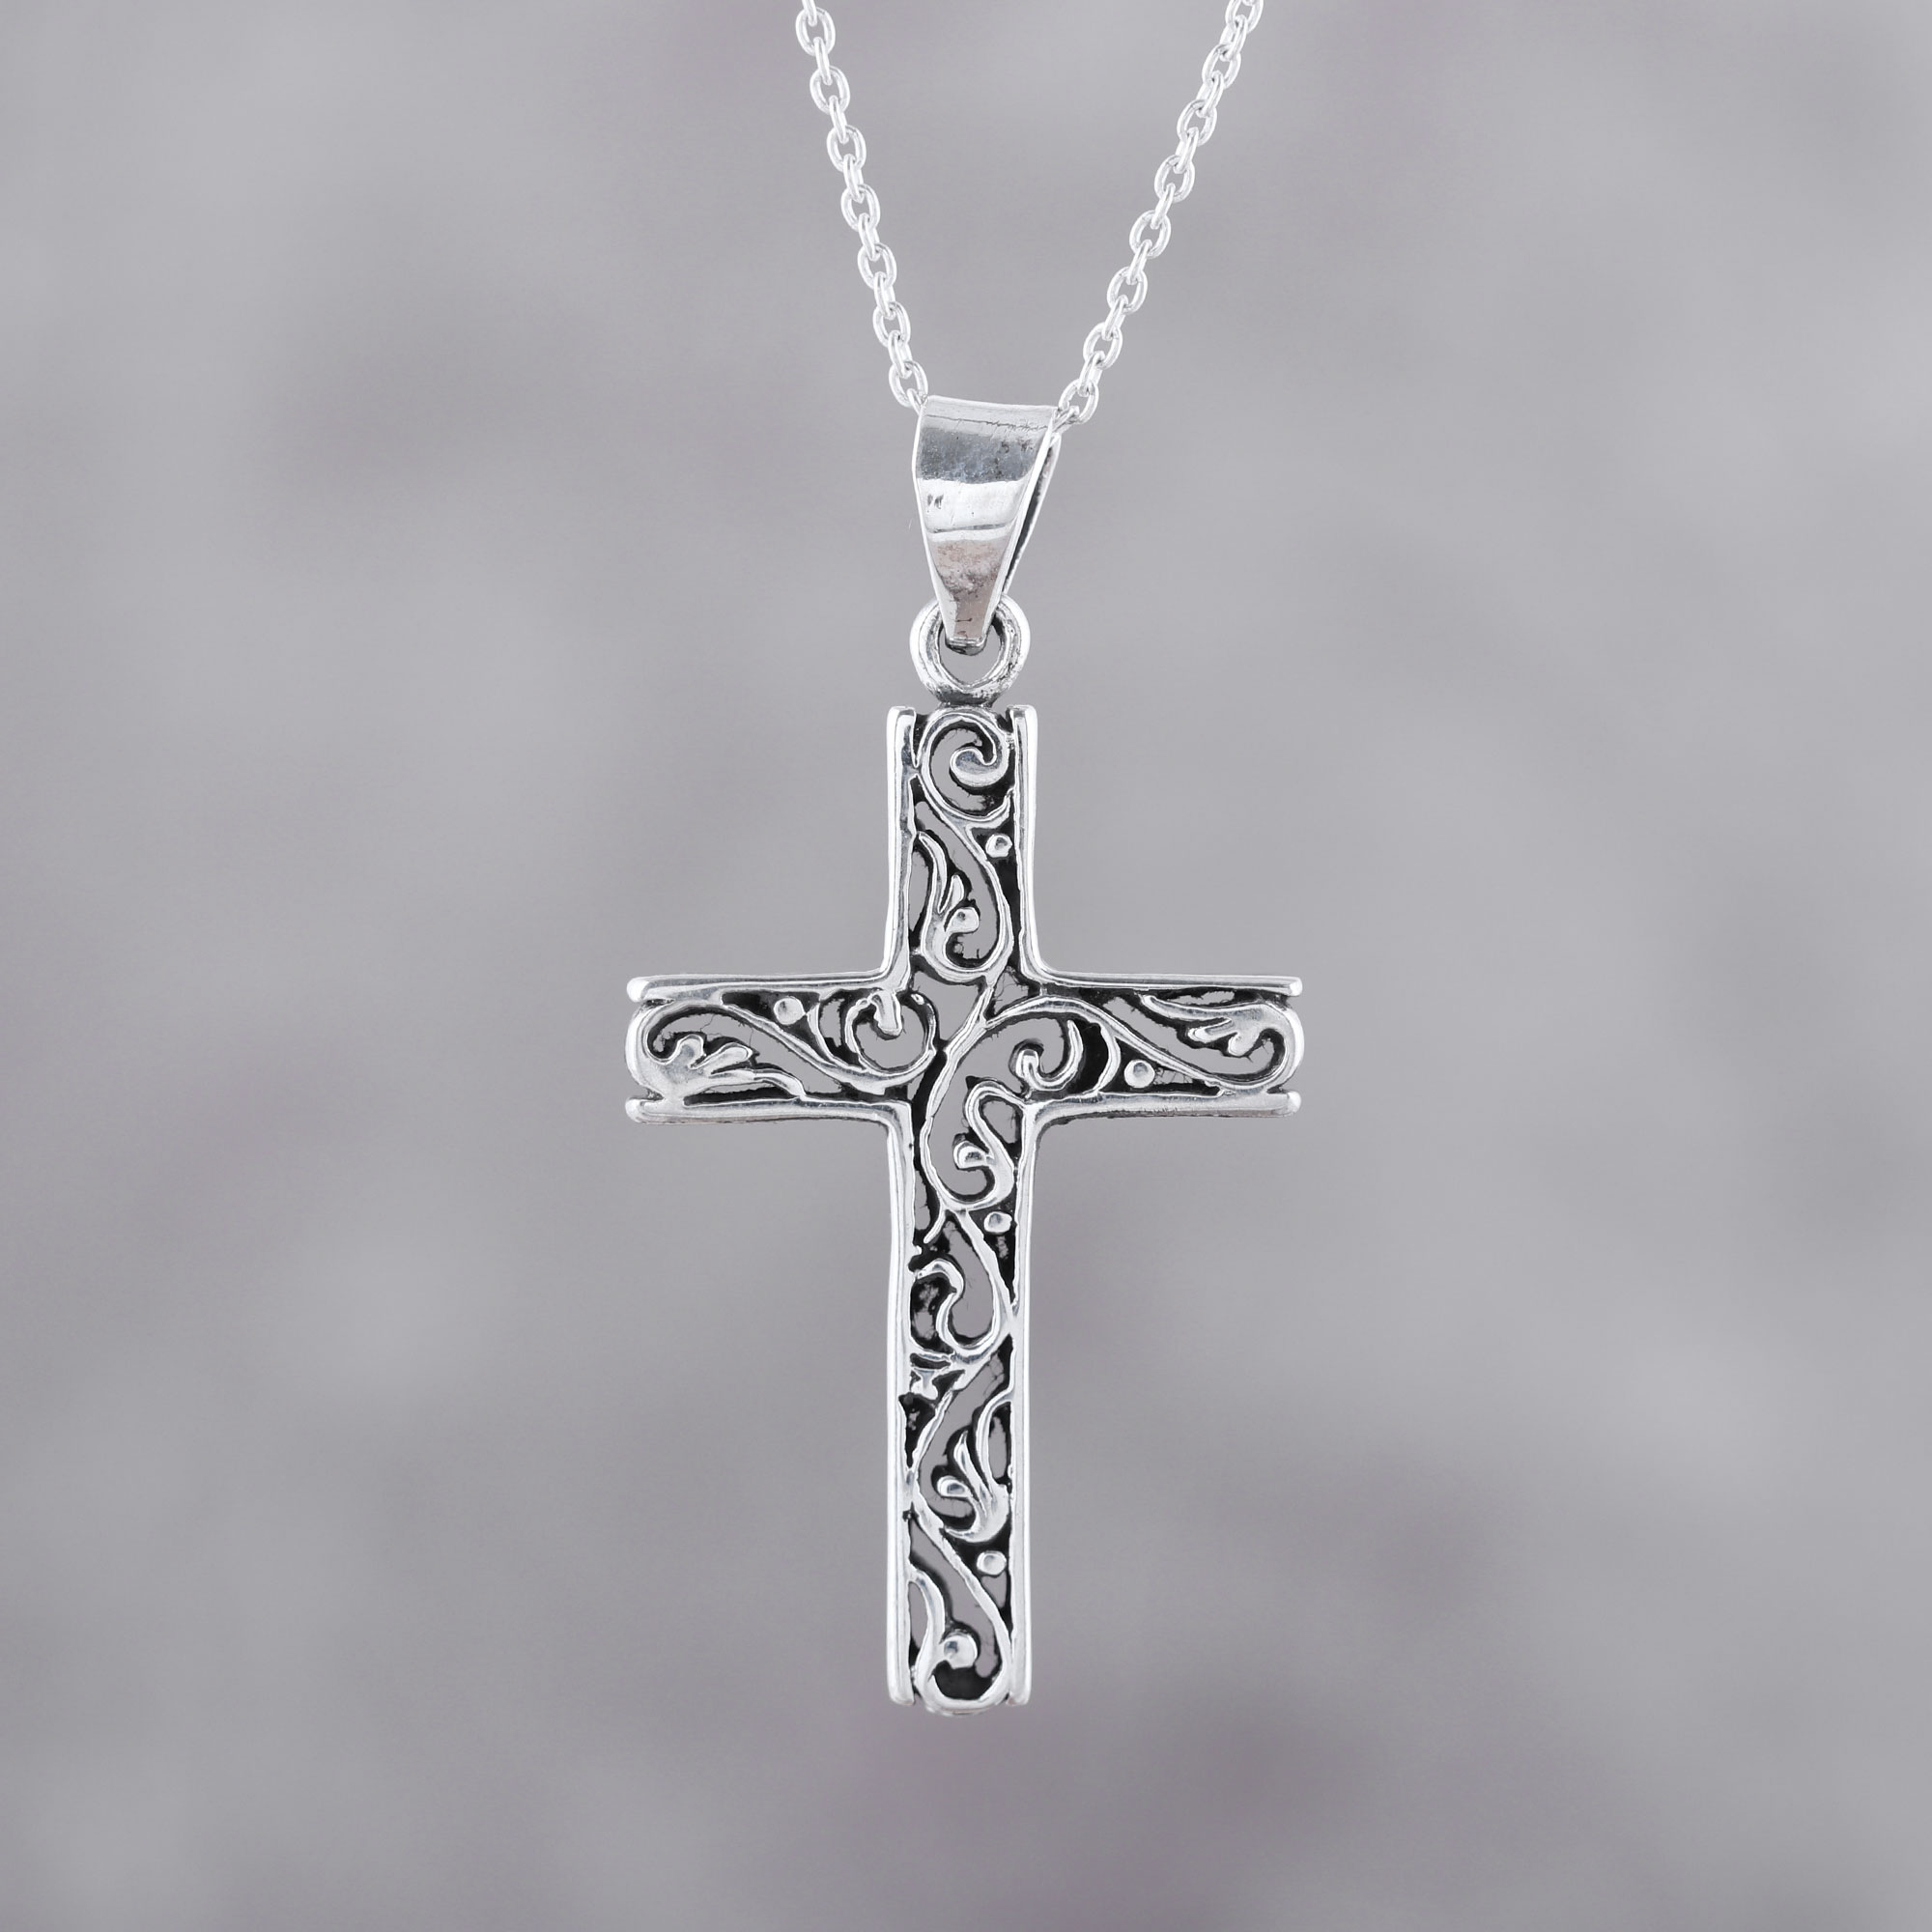 Handcrafted Sterling Silver Ornate Cross Pendant Necklace, 'Adorned Cross'